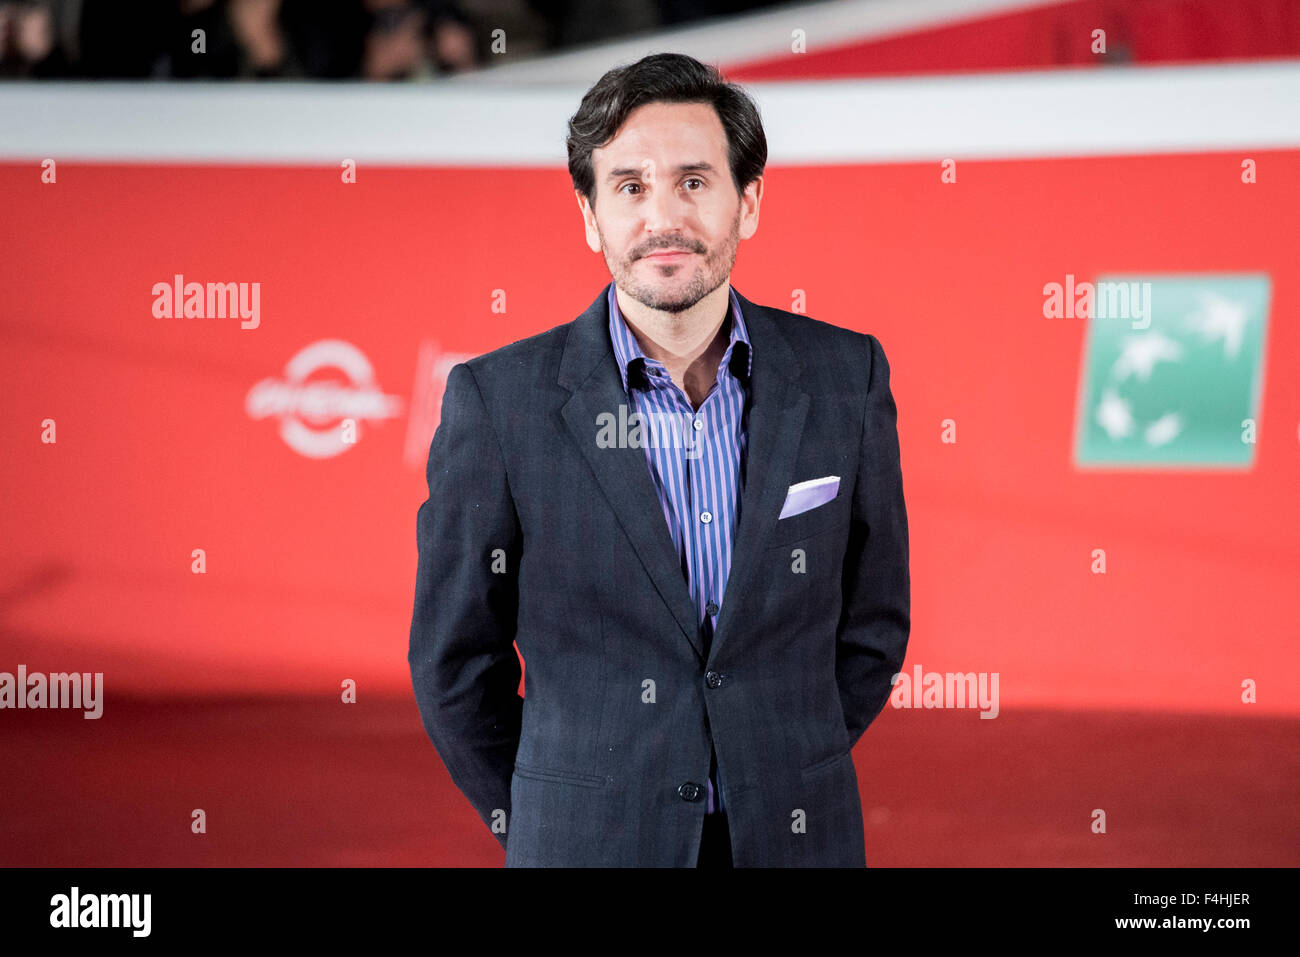 Rome, Italy. 18th Oct, 2015. 'Freeheld' Red Carpet at 10th Rome Film Festival at Auditorium Parco della Musica on October 18, 2015 in Rome, Italy. Pictured: Peter Sollett. Credit:  Massimo Valicchia/Alamy Live News Stock Photo